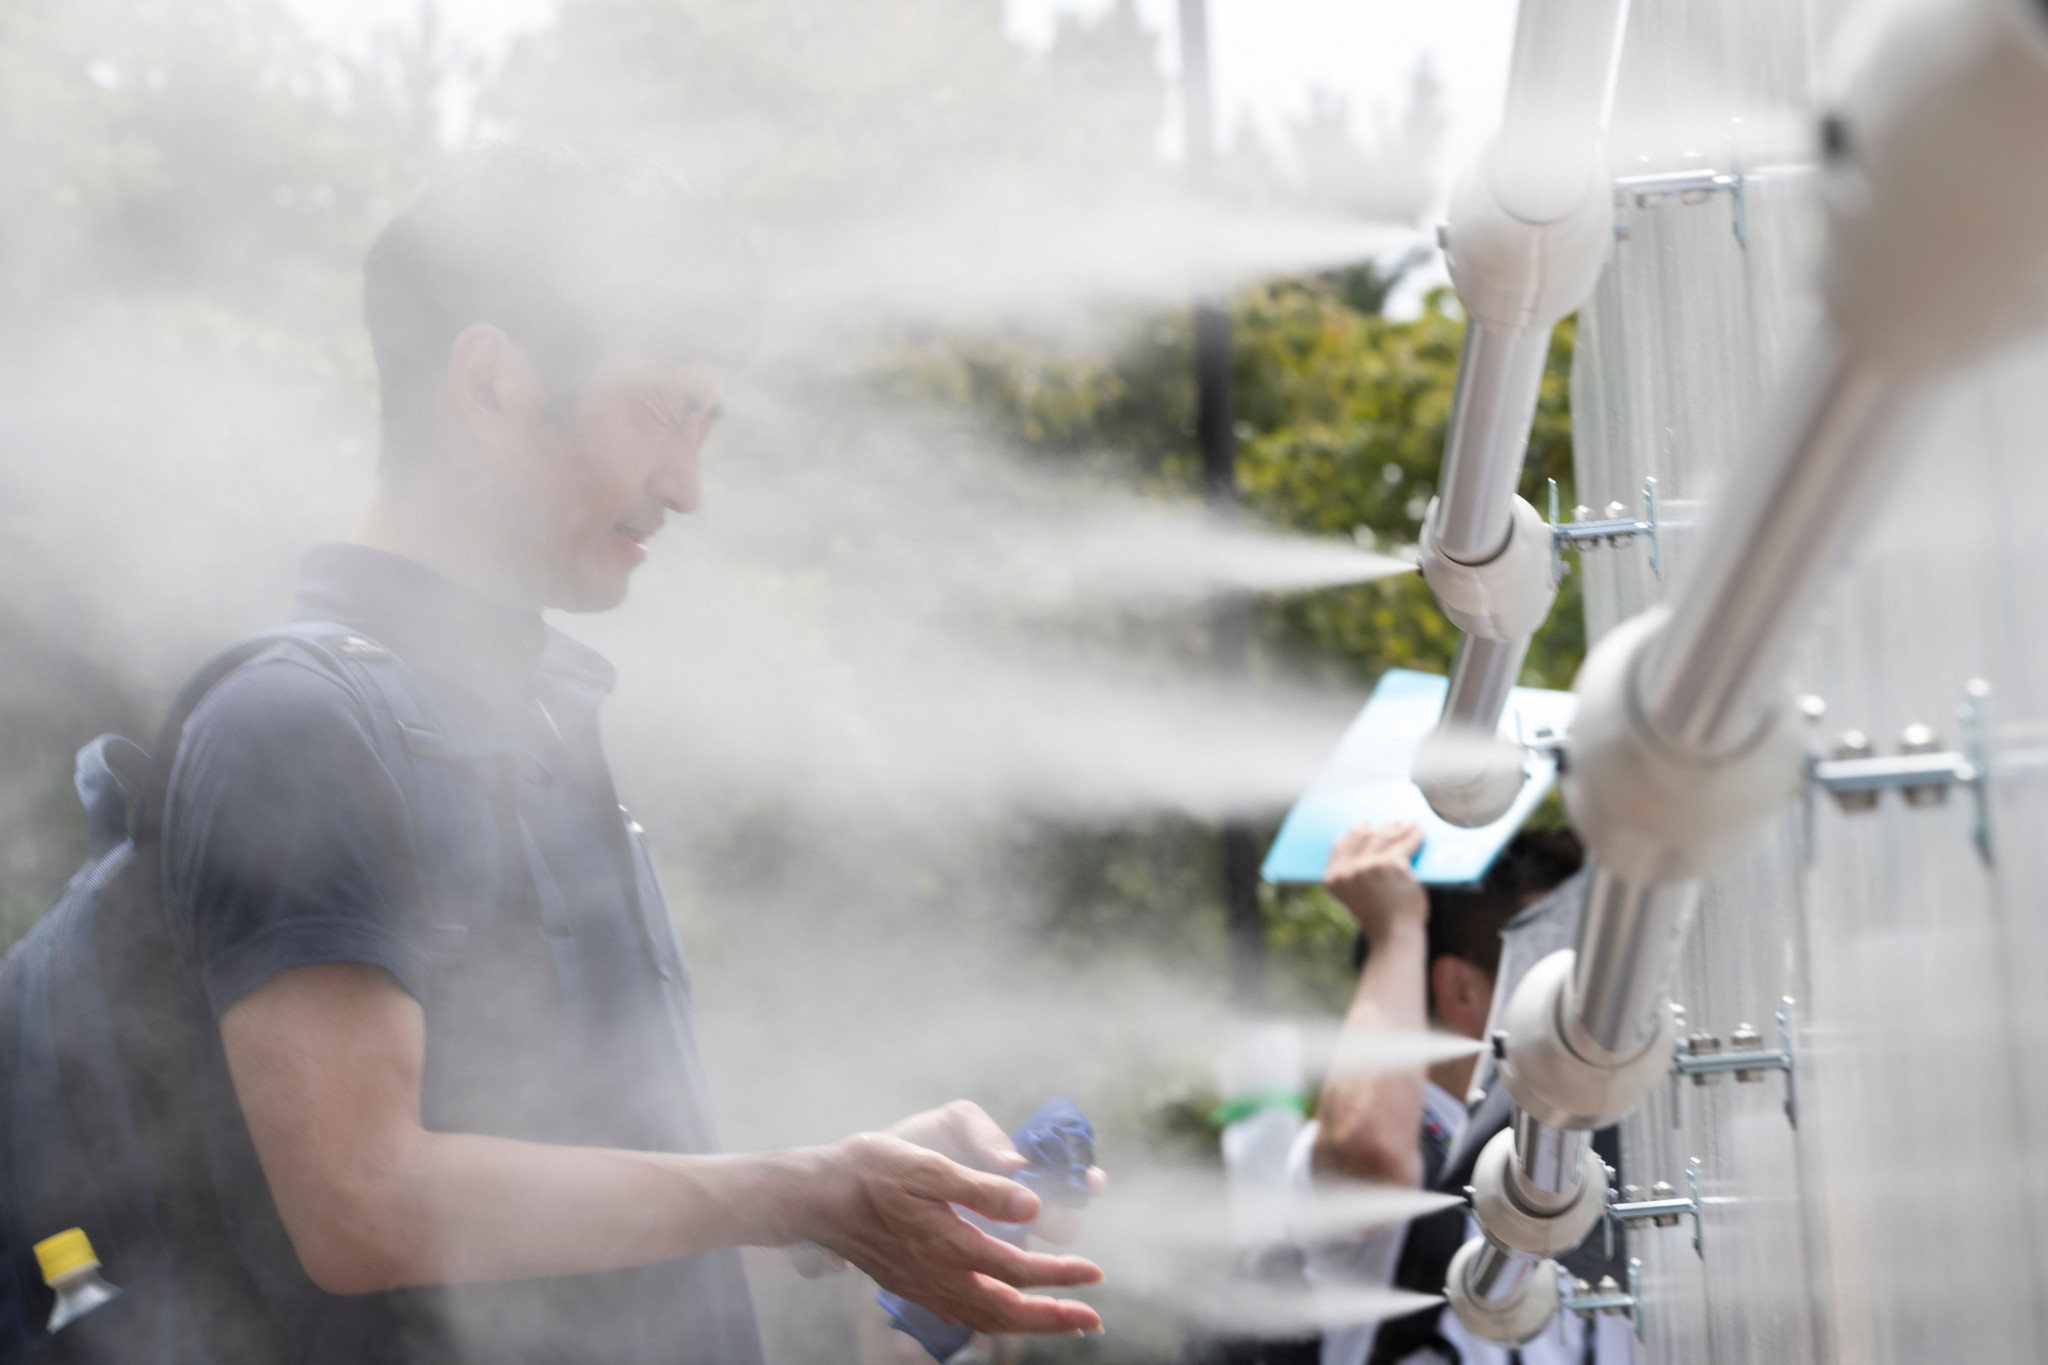 Cooling mist sprays were among a number of measures introduced to counter the heat at the Olympic and Paralympic Games in Tokyo ©Getty Images